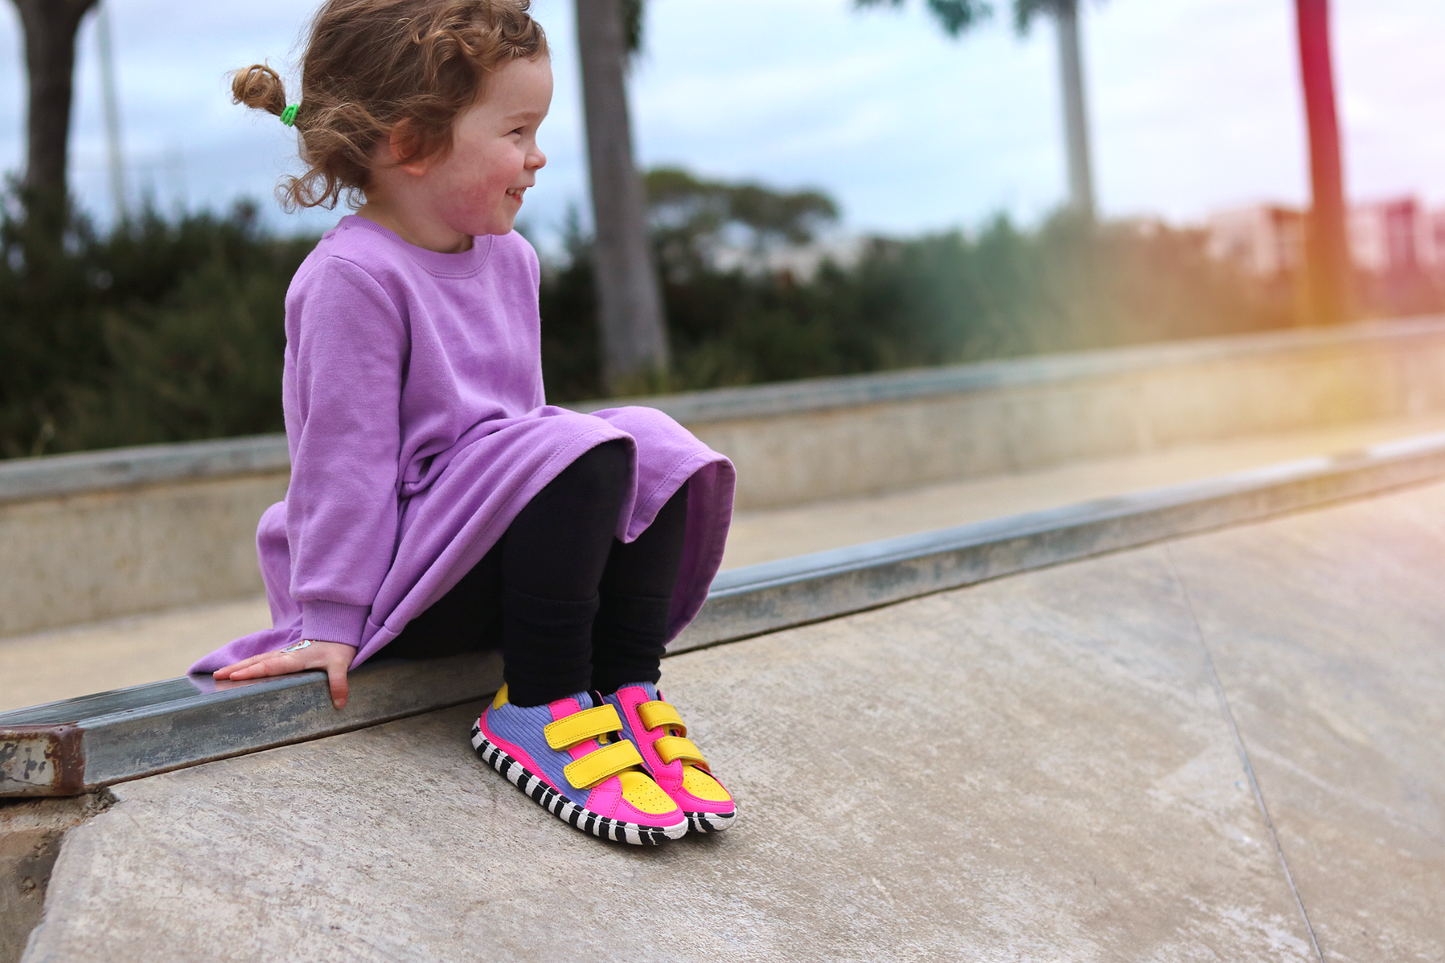 PUNKY VELCRO SHOES ON A SMILING CHILD